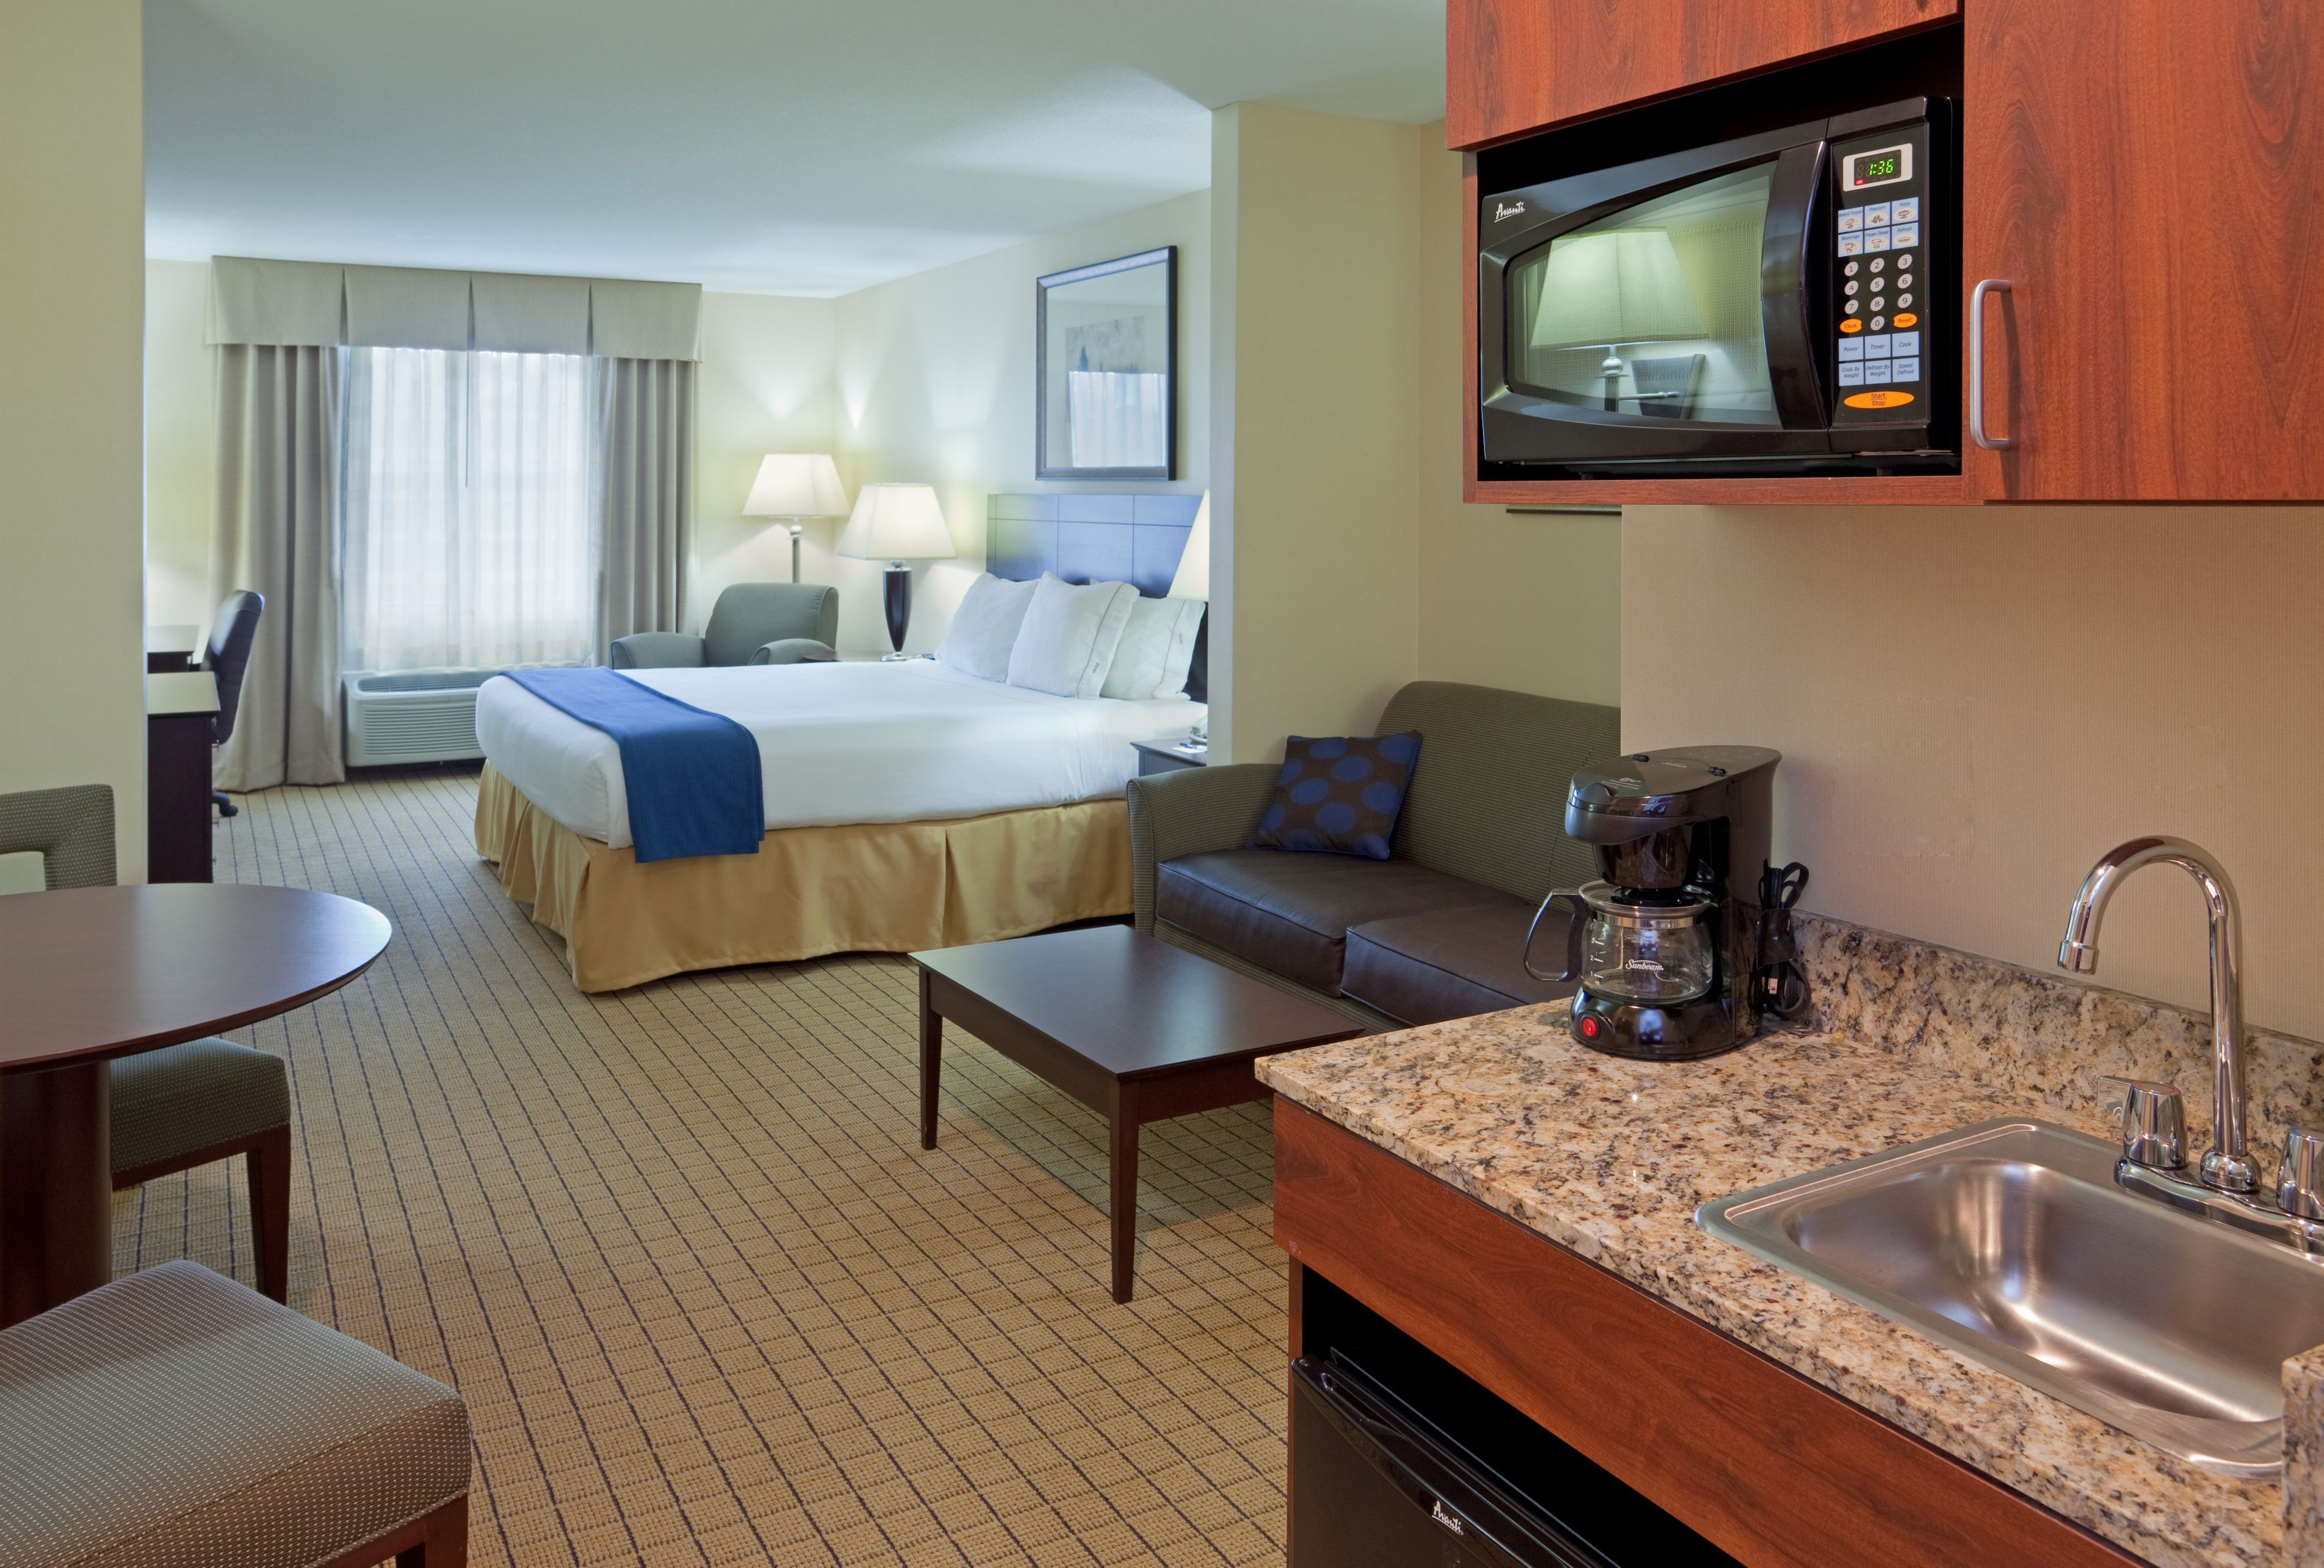 holiday-inn-express-and-suites-rochester-2533064915-original.jpg